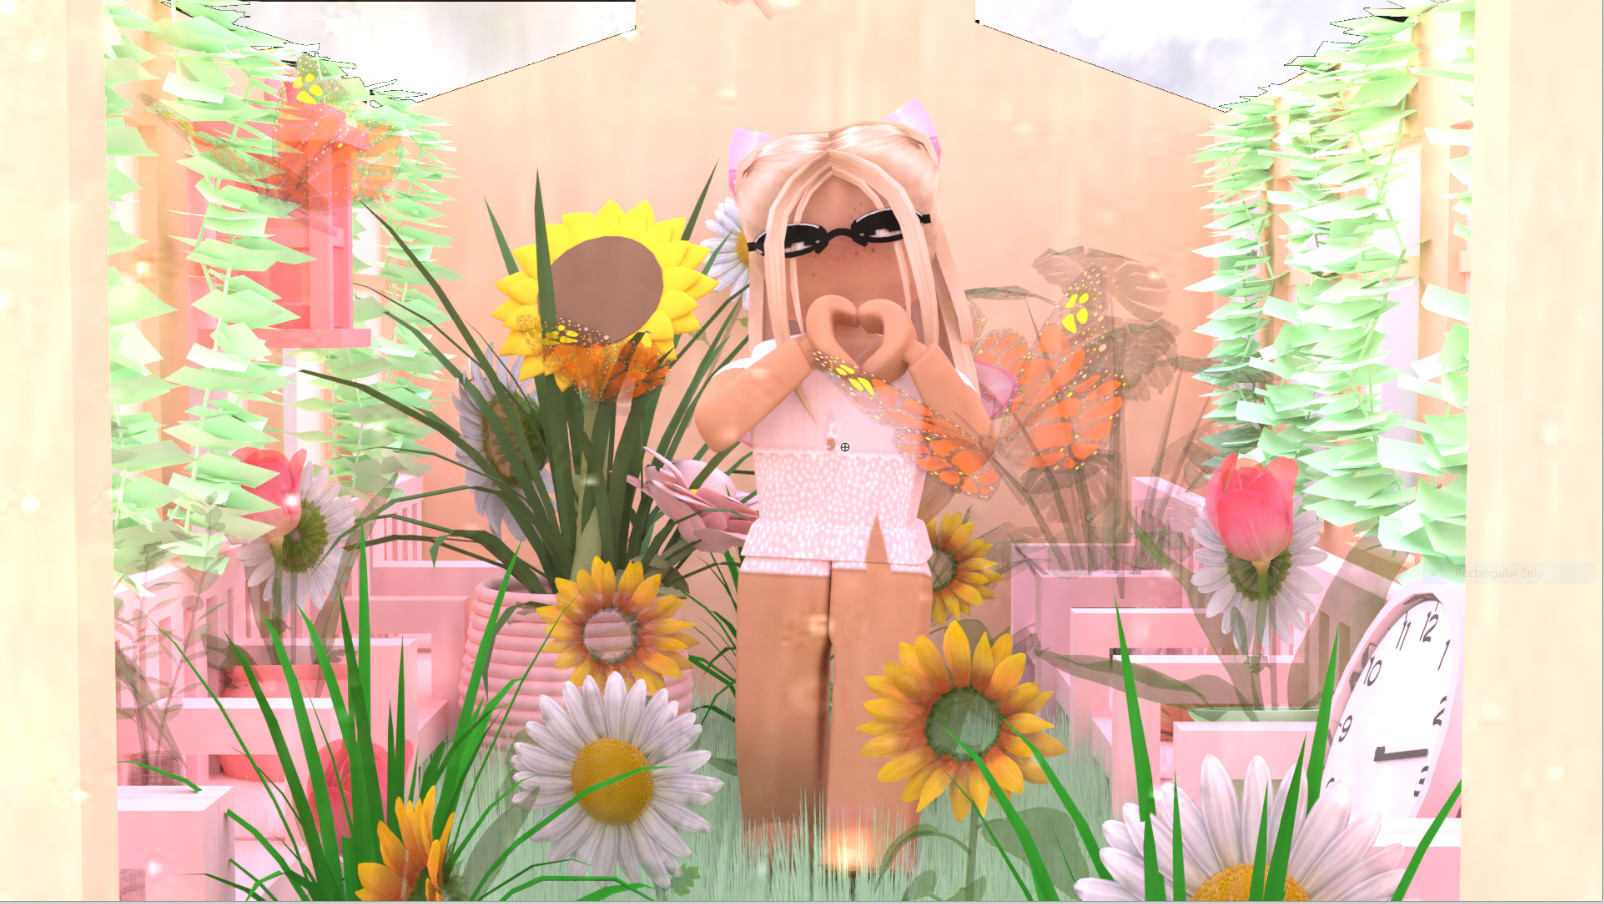 Create A Nice Aesthetic Roblox Gfx For You By Peacheyrxses - roblox aesthetic google search in 2020 roblox pictures aesthetic girl roblox